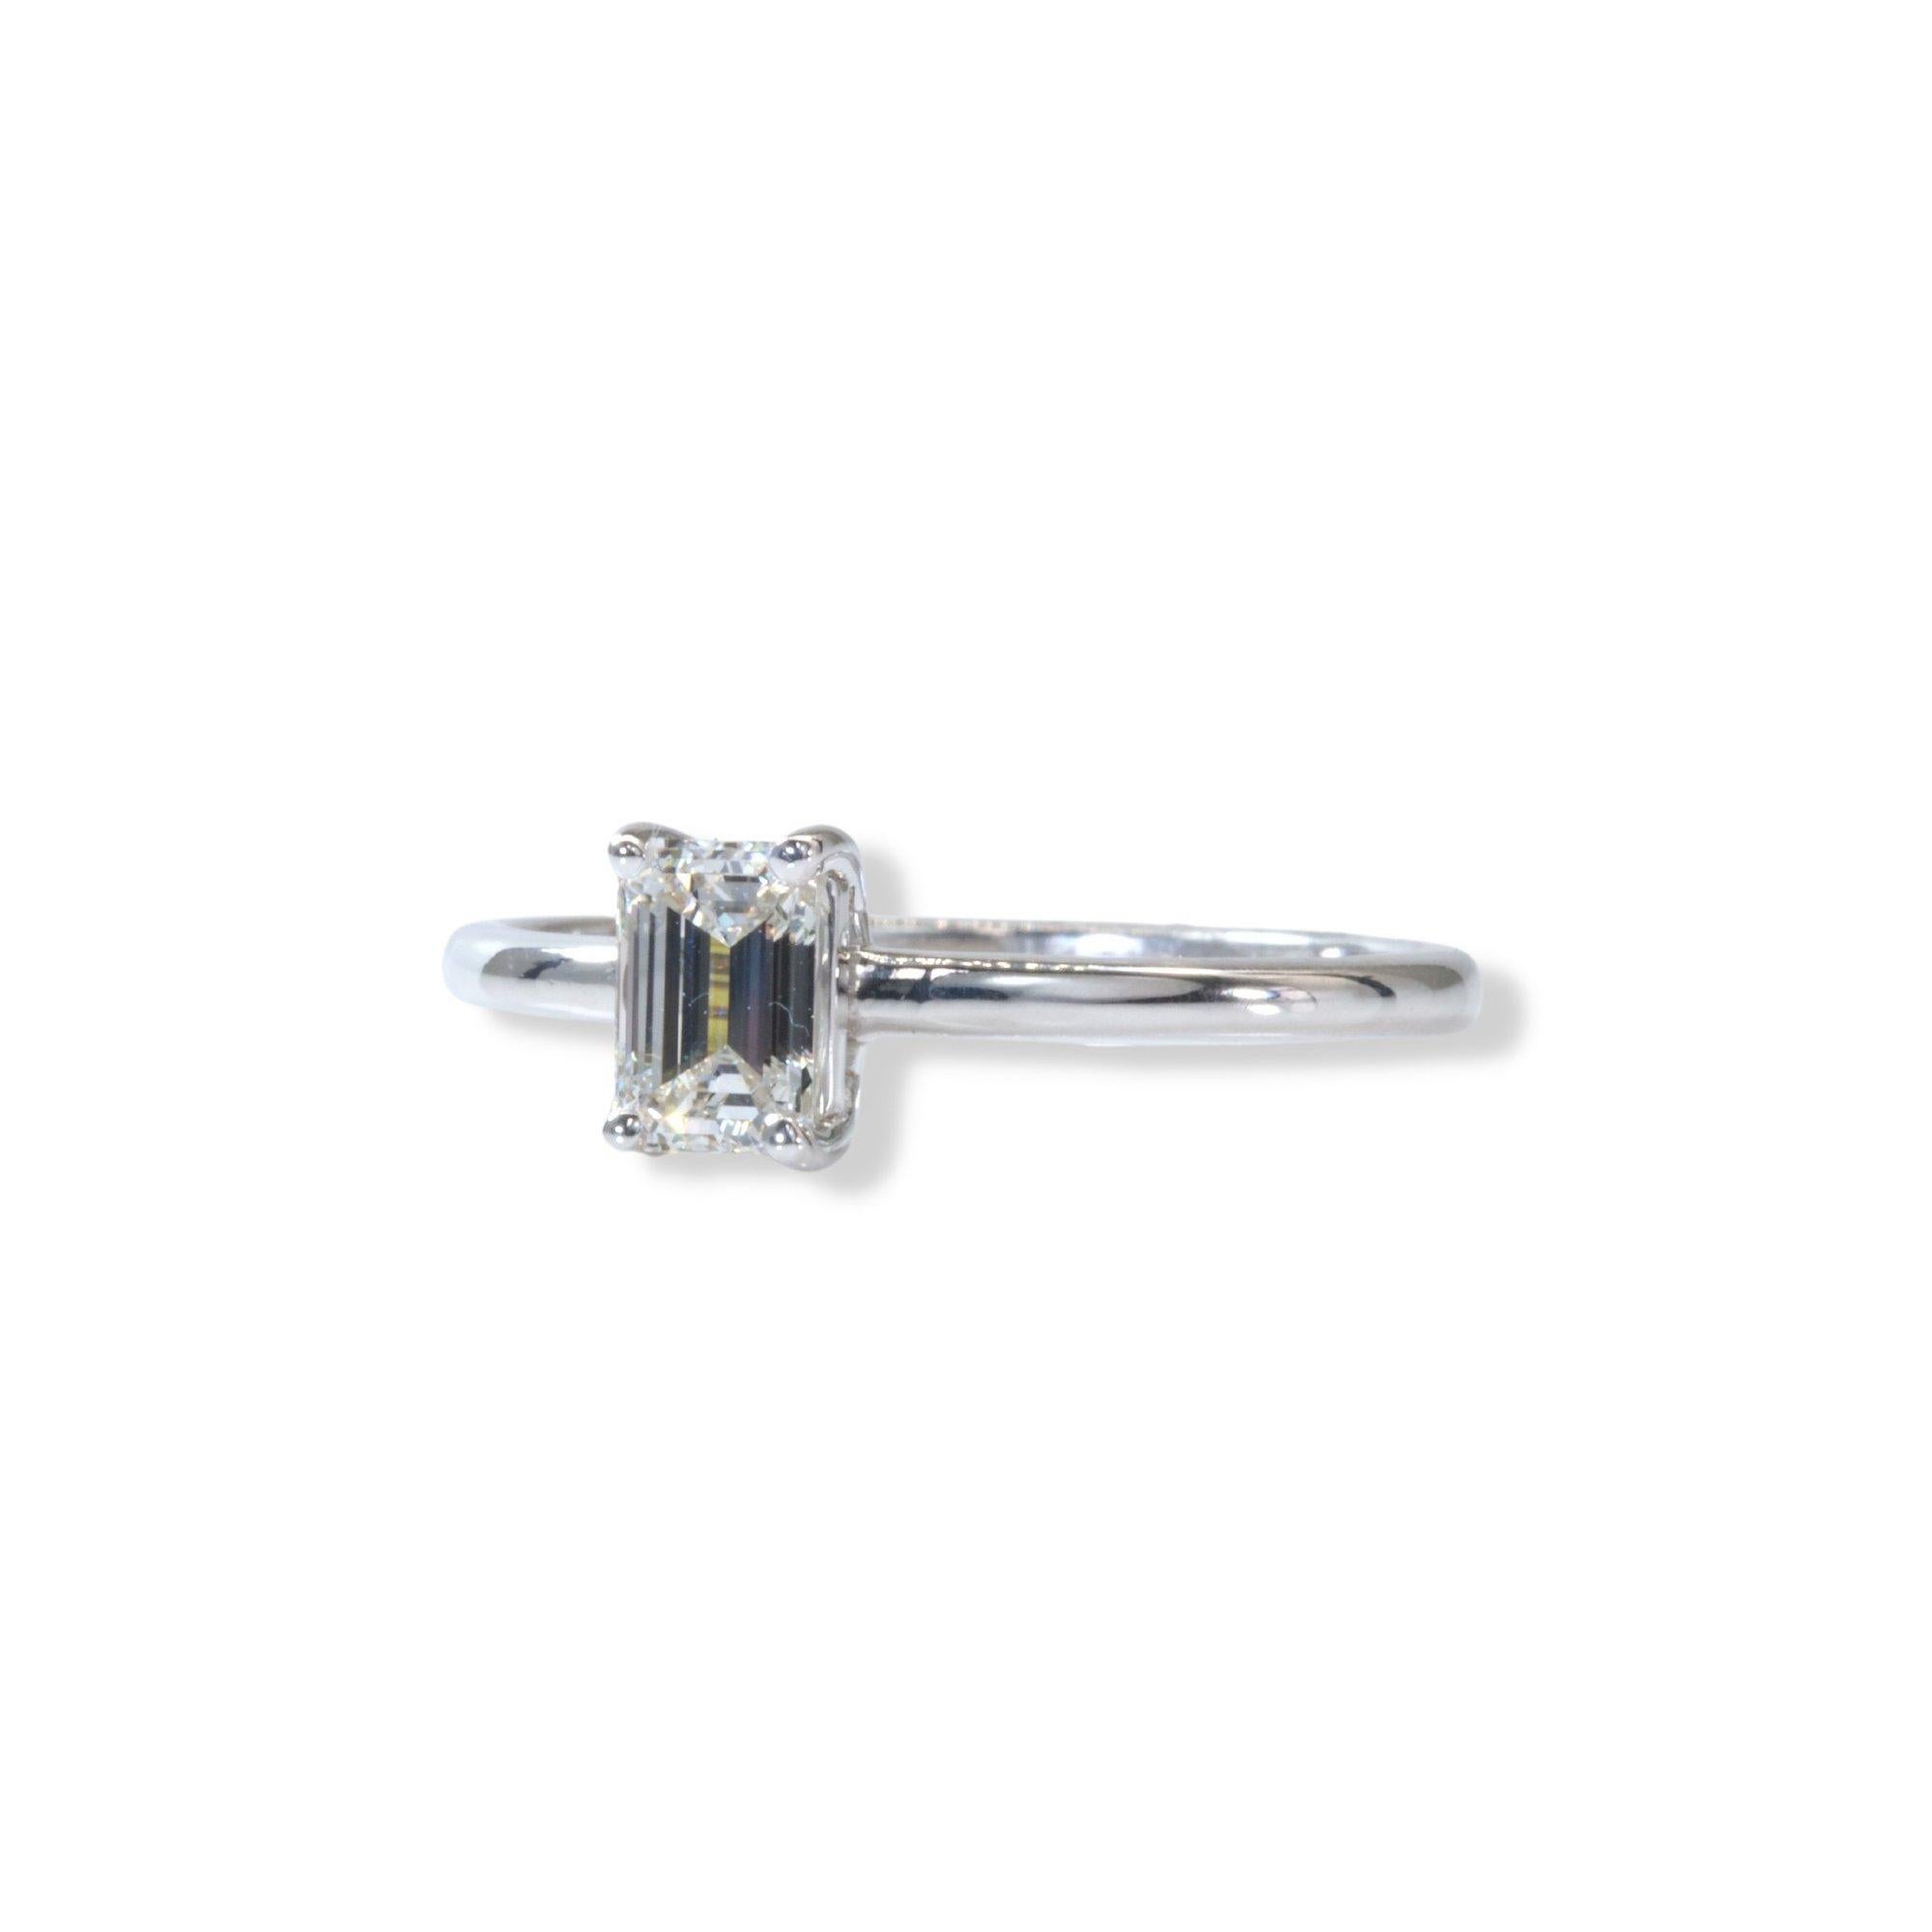 A stunning classic solitaire ring with a dazzling 0.90 carat emerald cut natural diamond. The setting is made of 18K white gold with a high quality polish. The main stone has a laser inscription and a GIA Certificate. It comes with a fancy jewelry